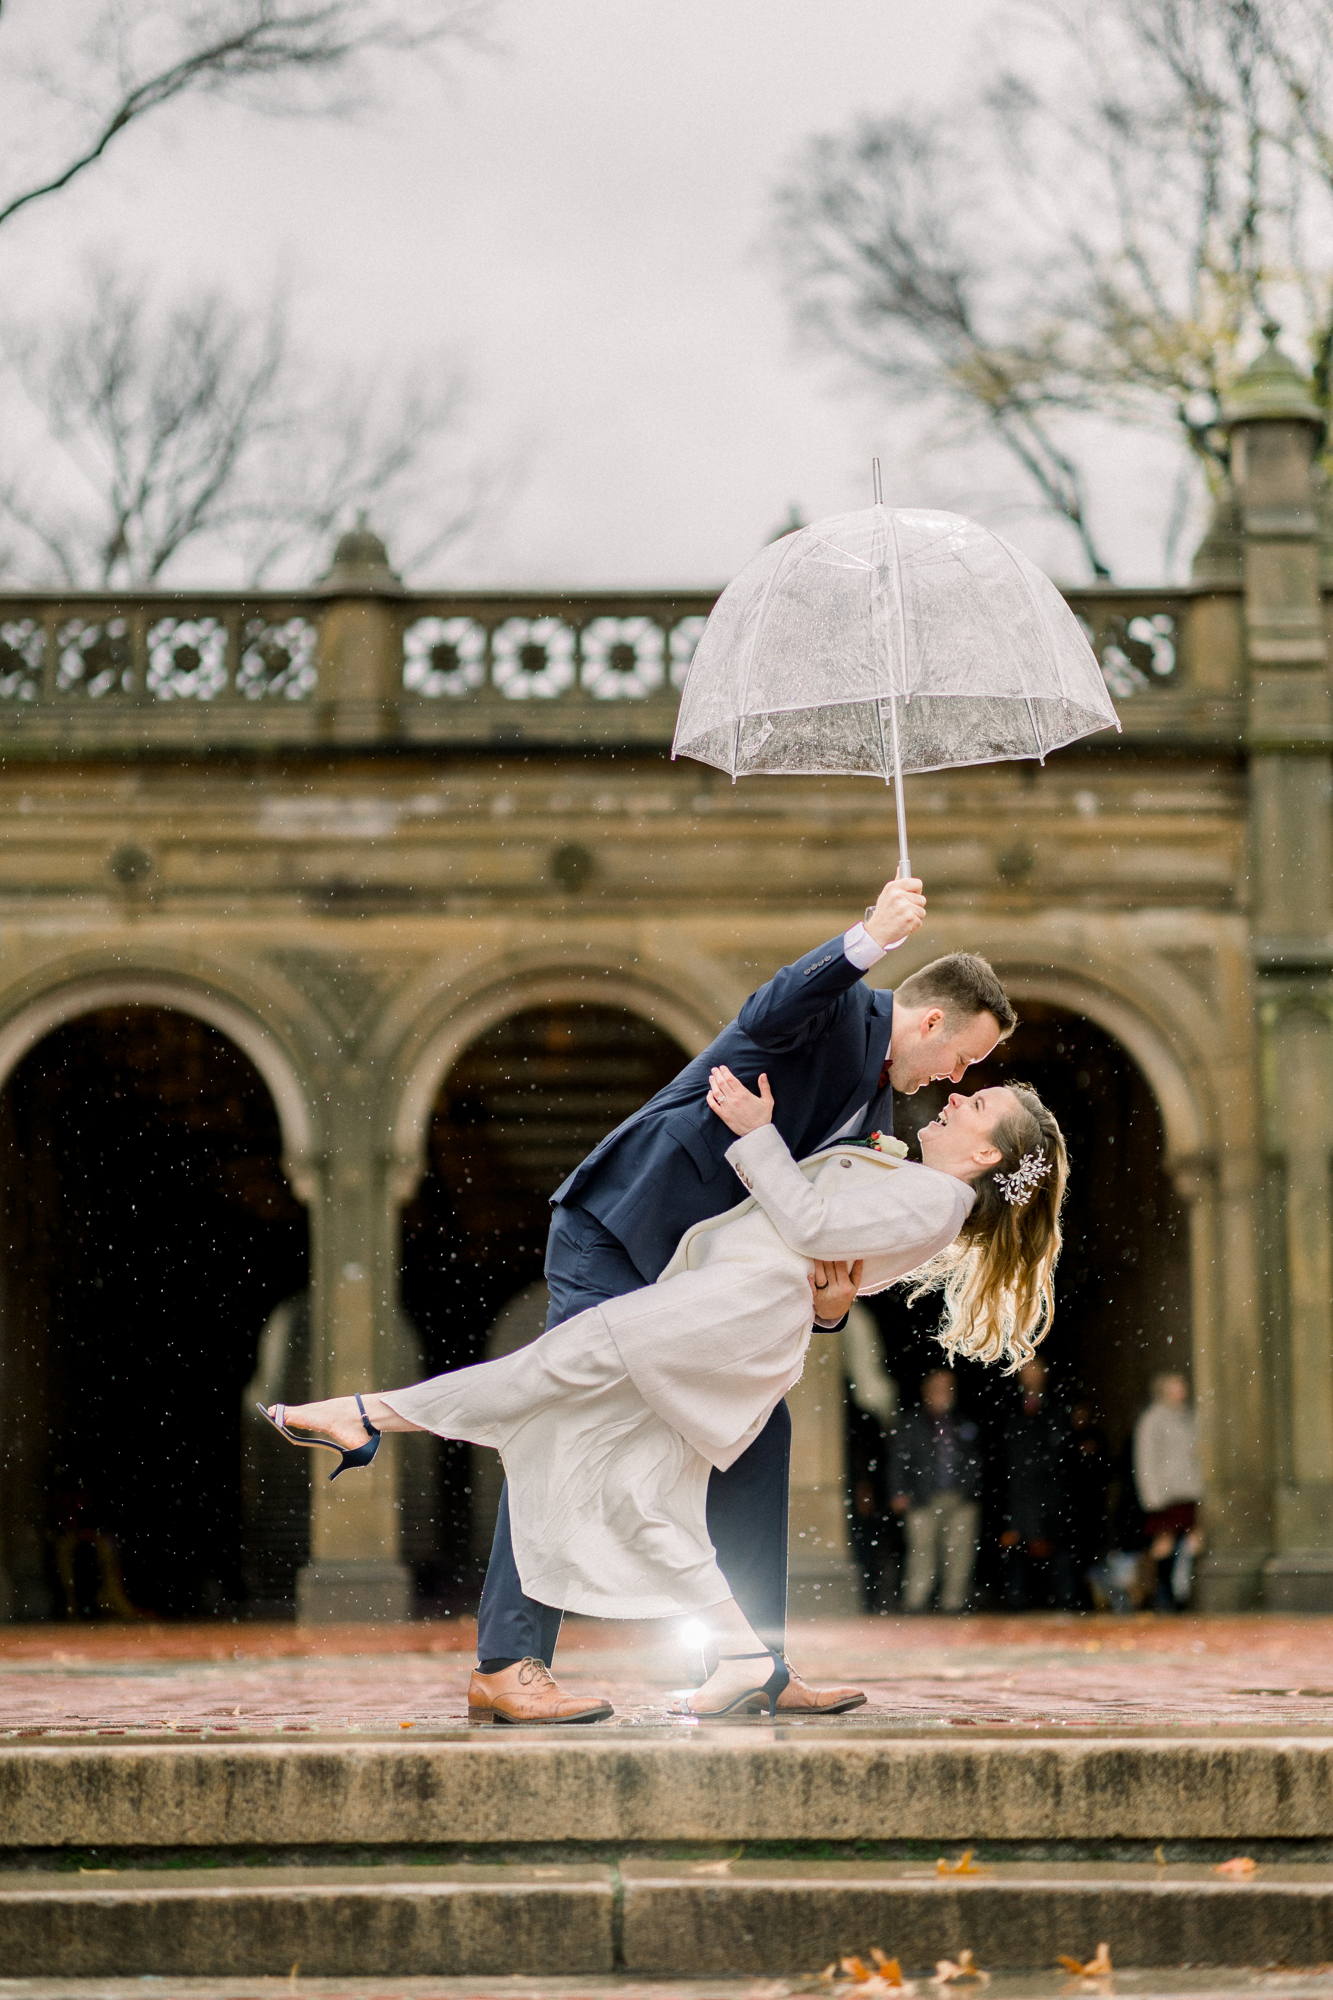 Romantic Elopement Photography in NYC